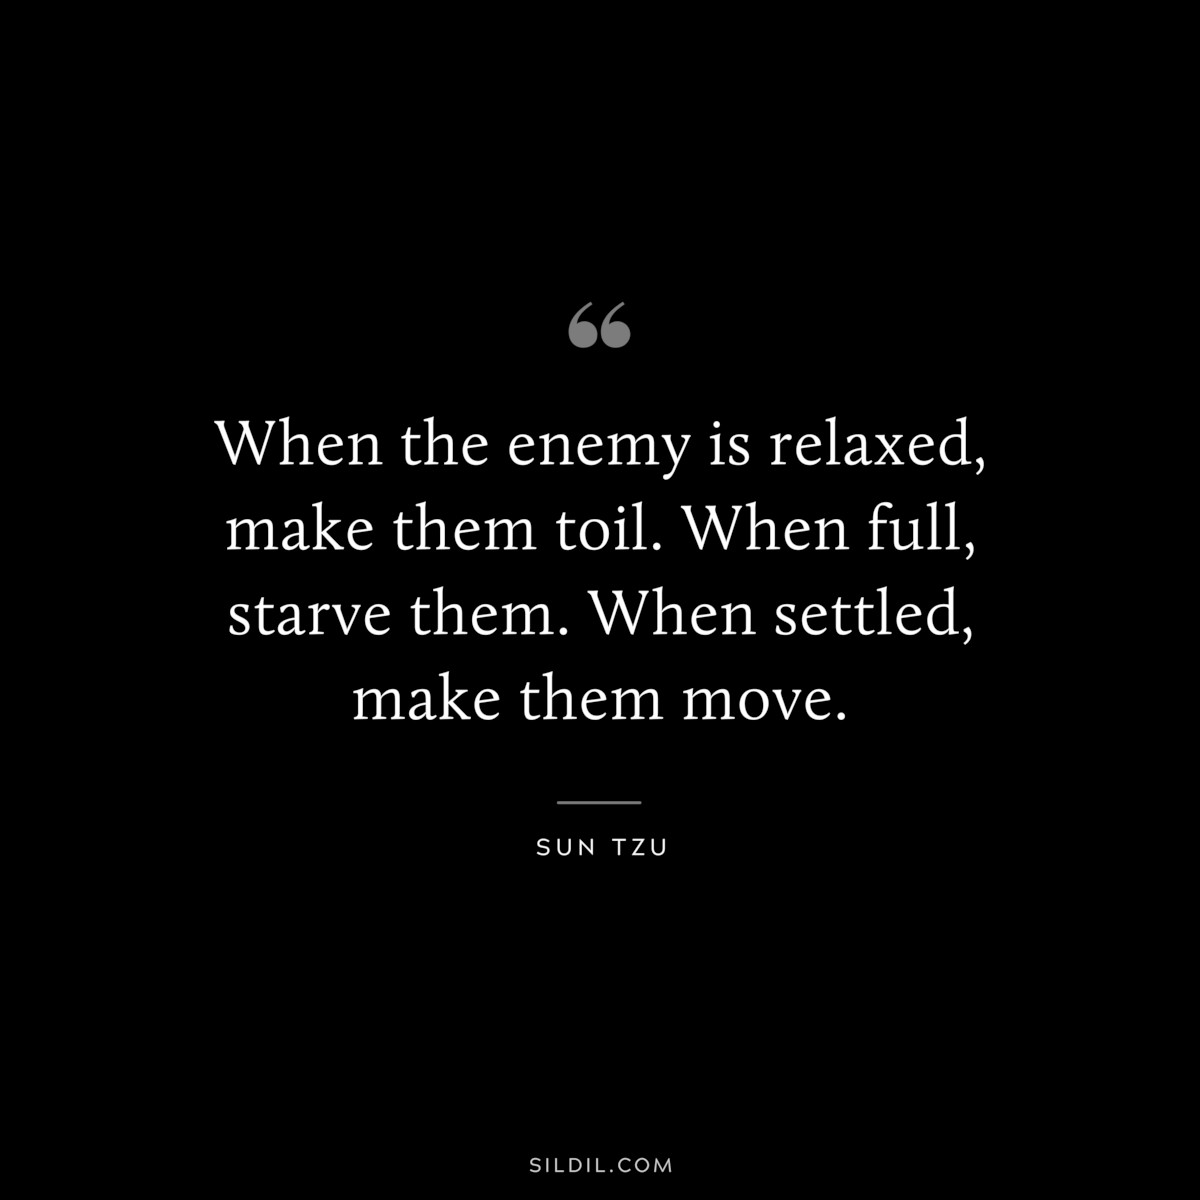 When the enemy is relaxed, make them toil. When full, starve them. When settled, make them move.― Sun Tzu